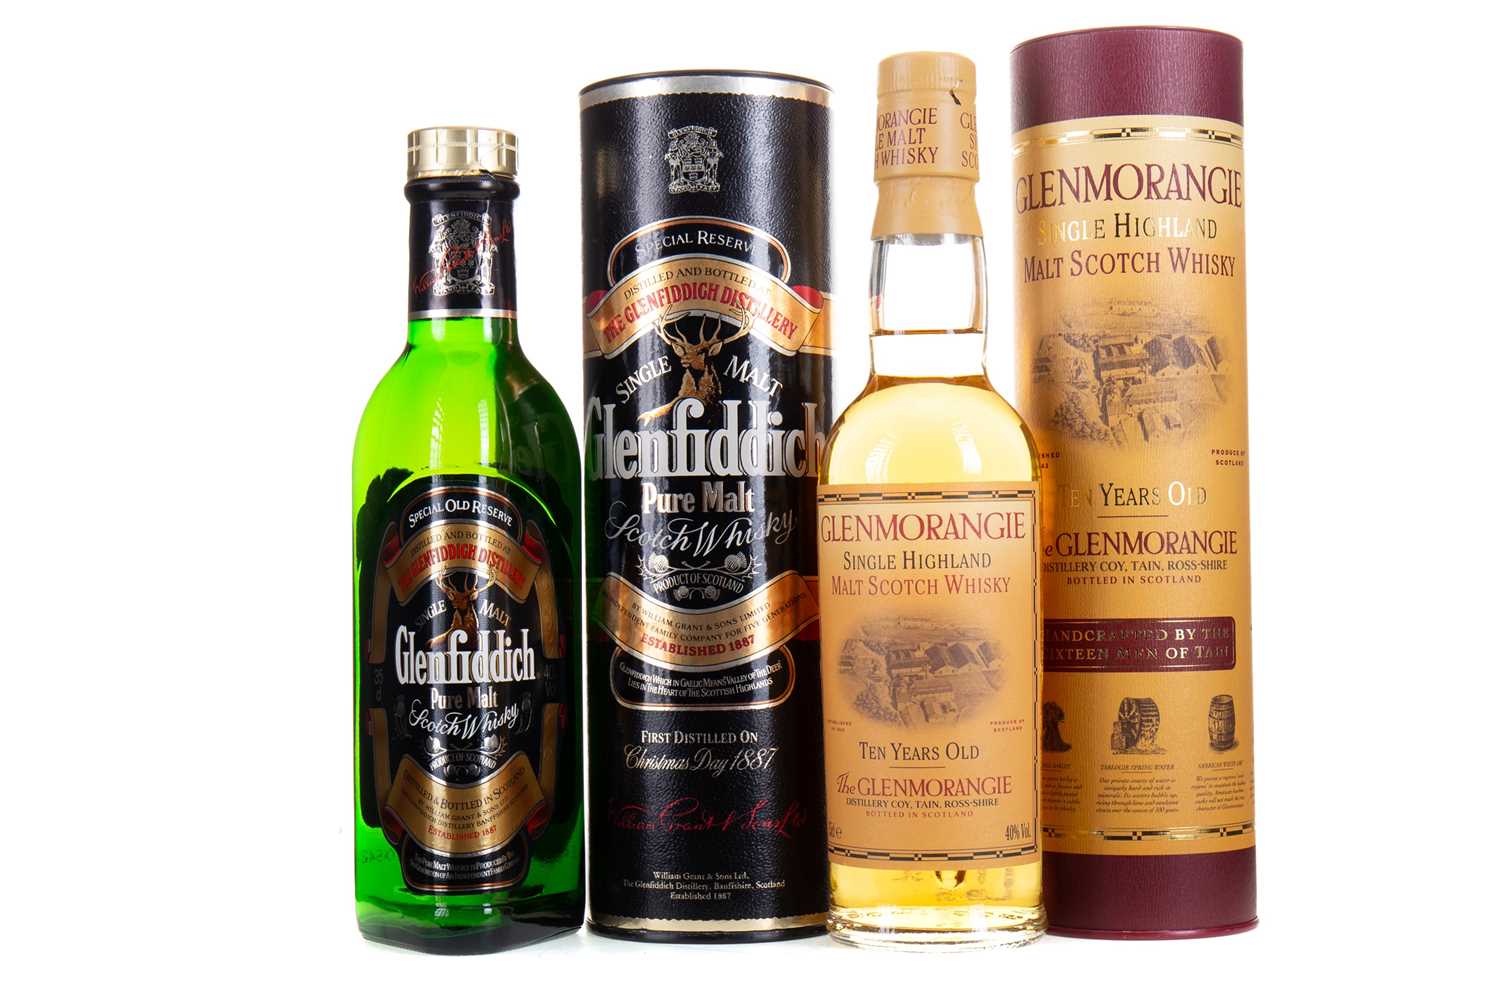 Lot 143 - GLENFIDDICH SPECIAL OLD RESERVE 35CL & GLENMORANGIE 10 YEAR OLD 35CL